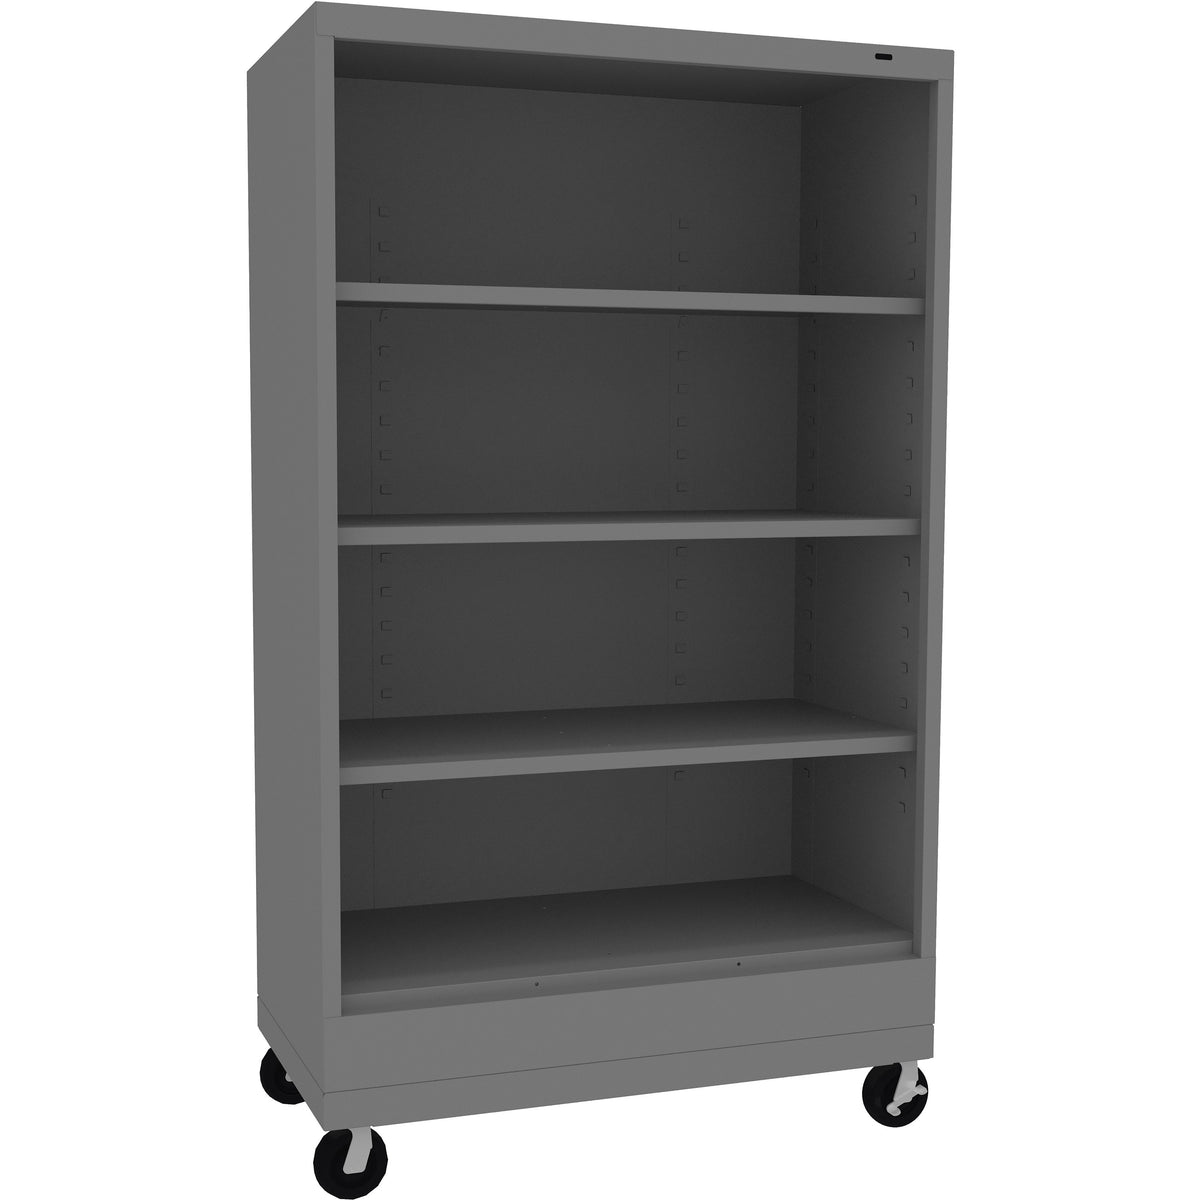 Tennsco 55" High Welded Bookcase with Casters - 18" Deep, BC18-52M